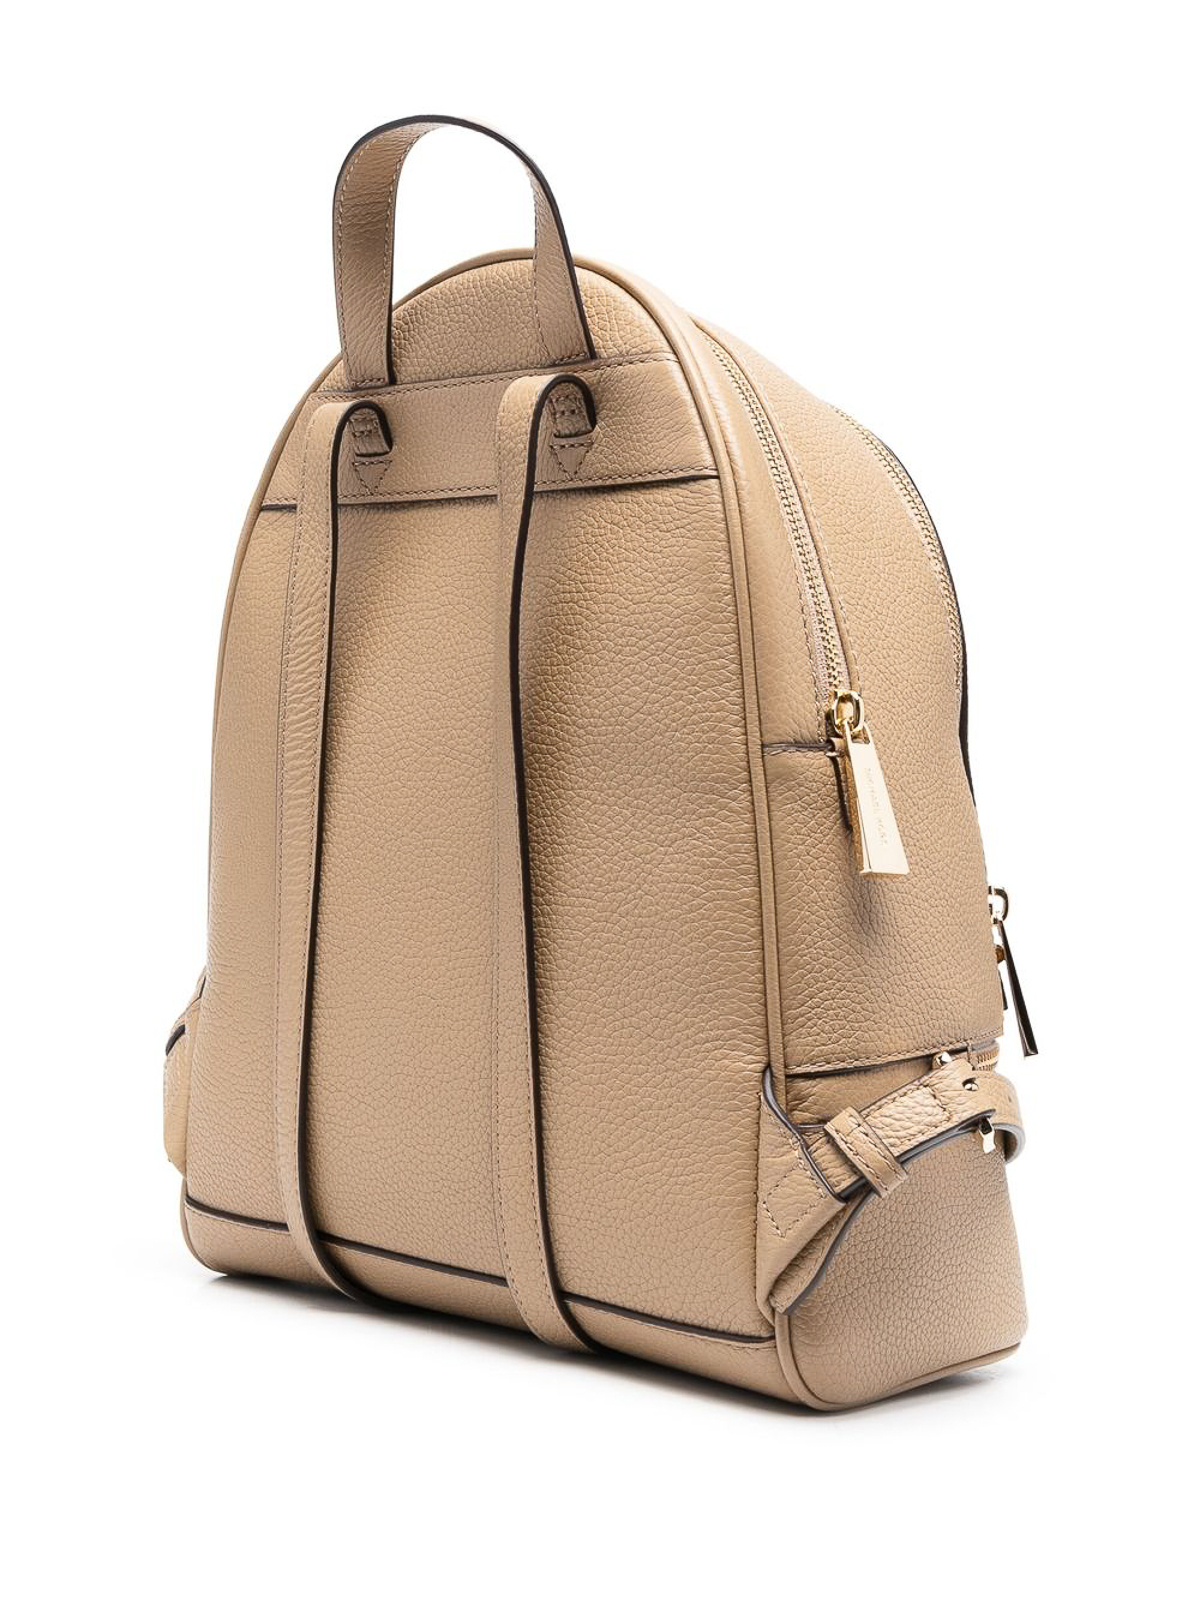 Sally Medium Saffiano Leather 2-In-1 Backpack | Michael Kors